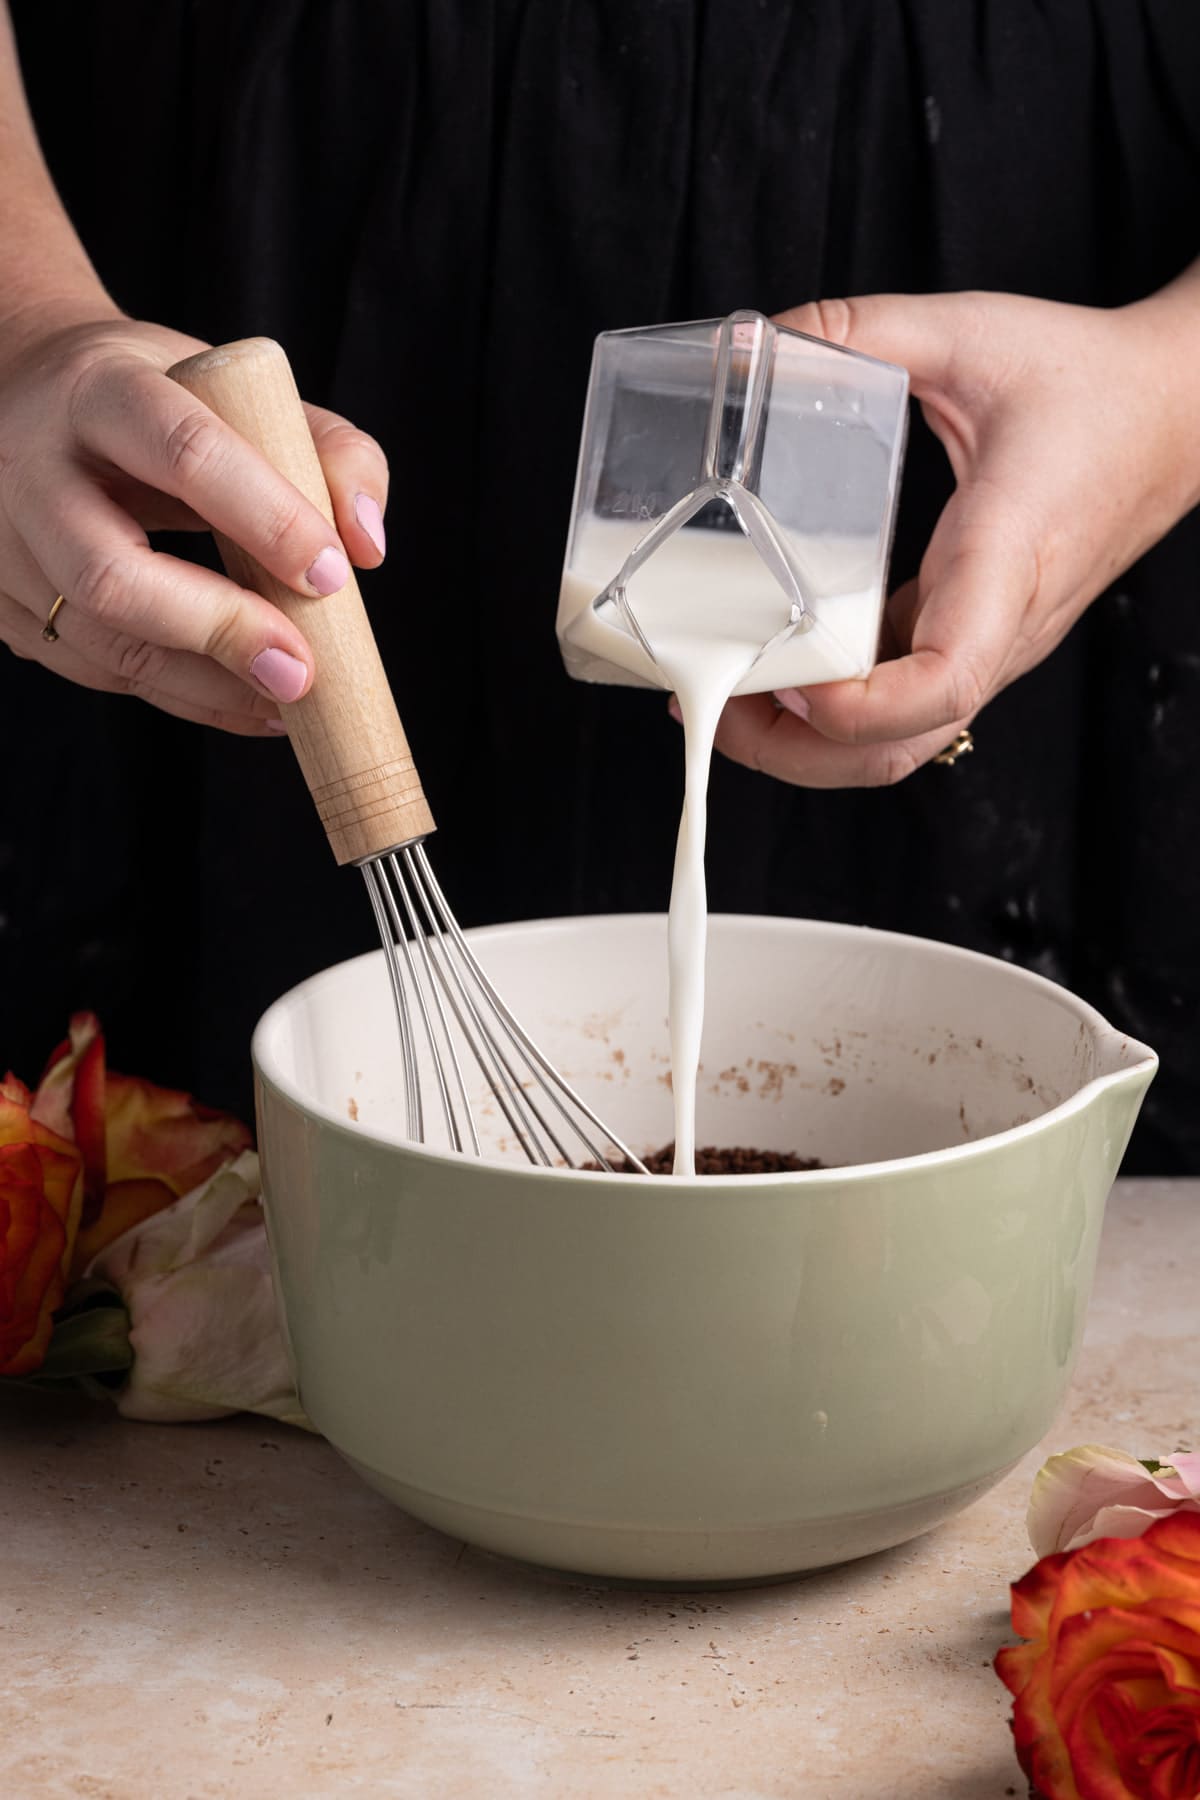 Thinning out edible brownie batter with milk